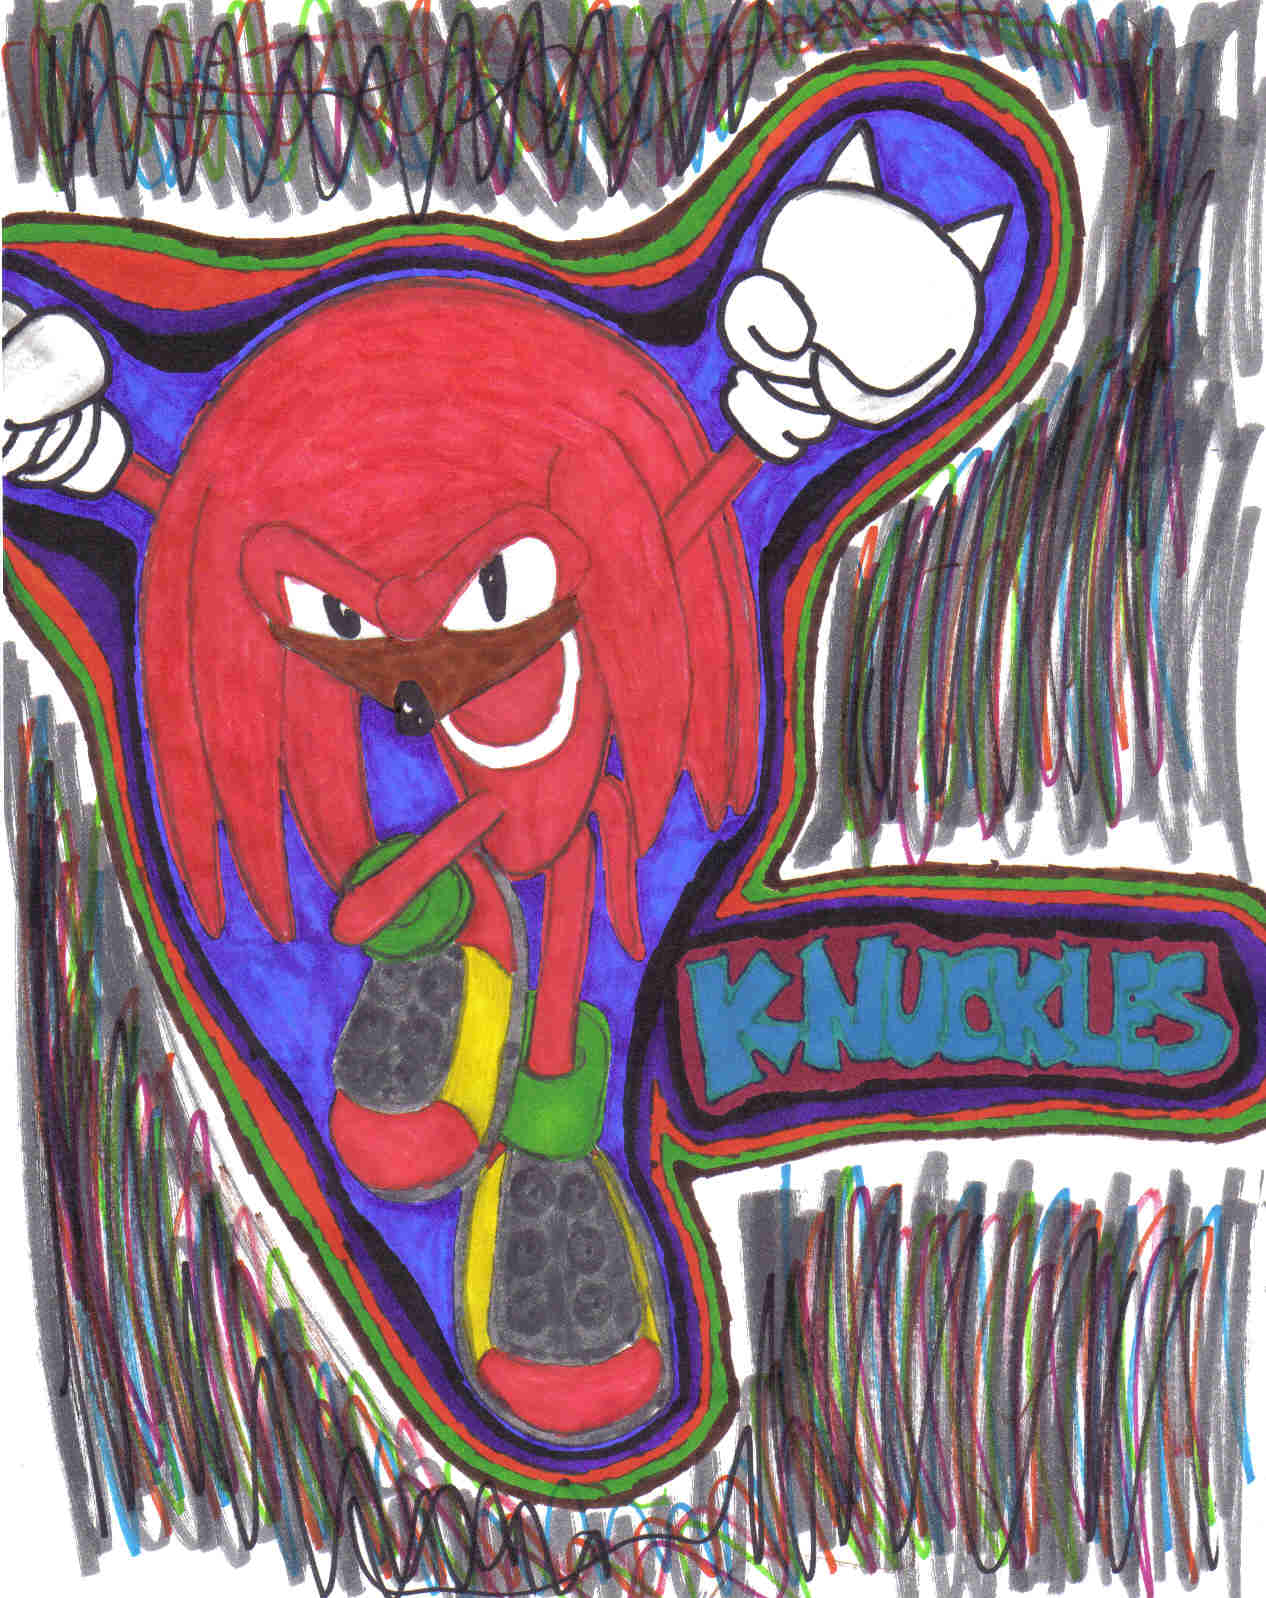 It's Knuckles! by orchid